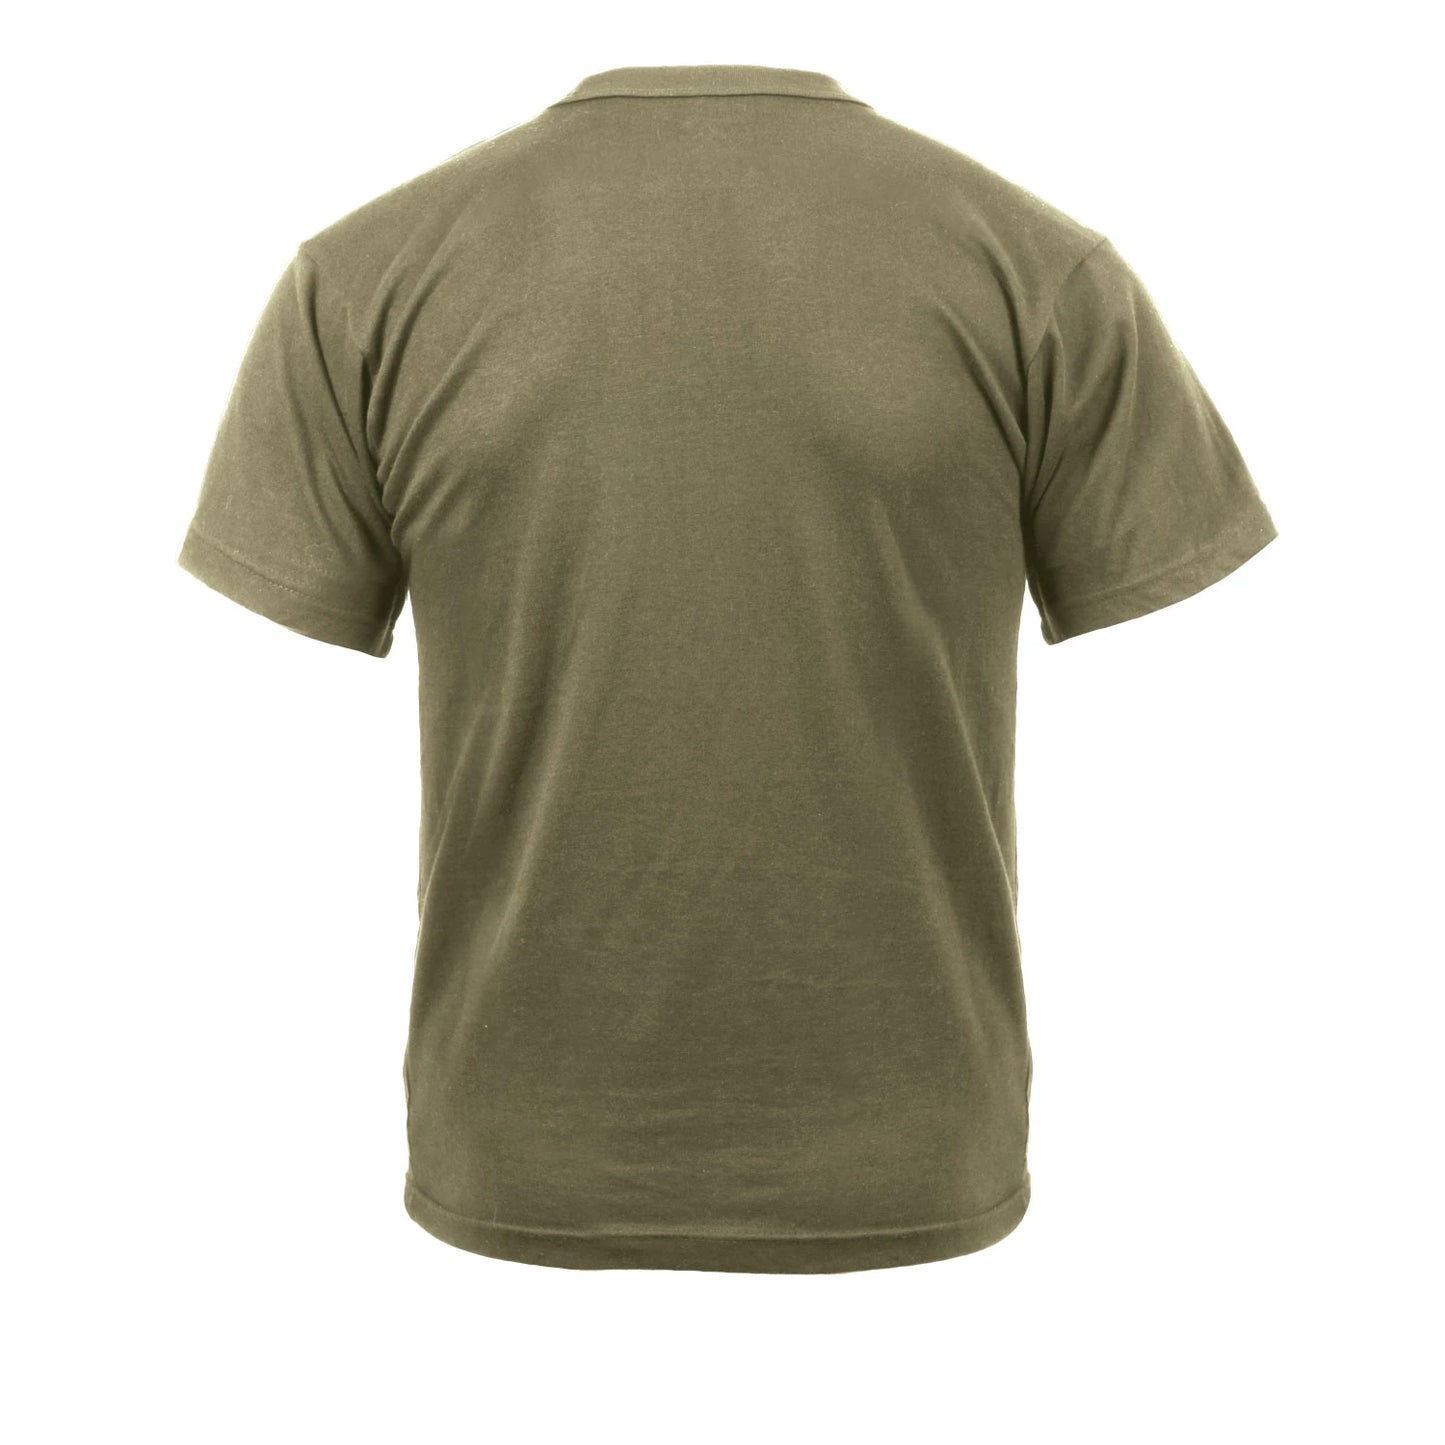 AR 670-1 Coyote Brown - Short Sleeve T-Shirt